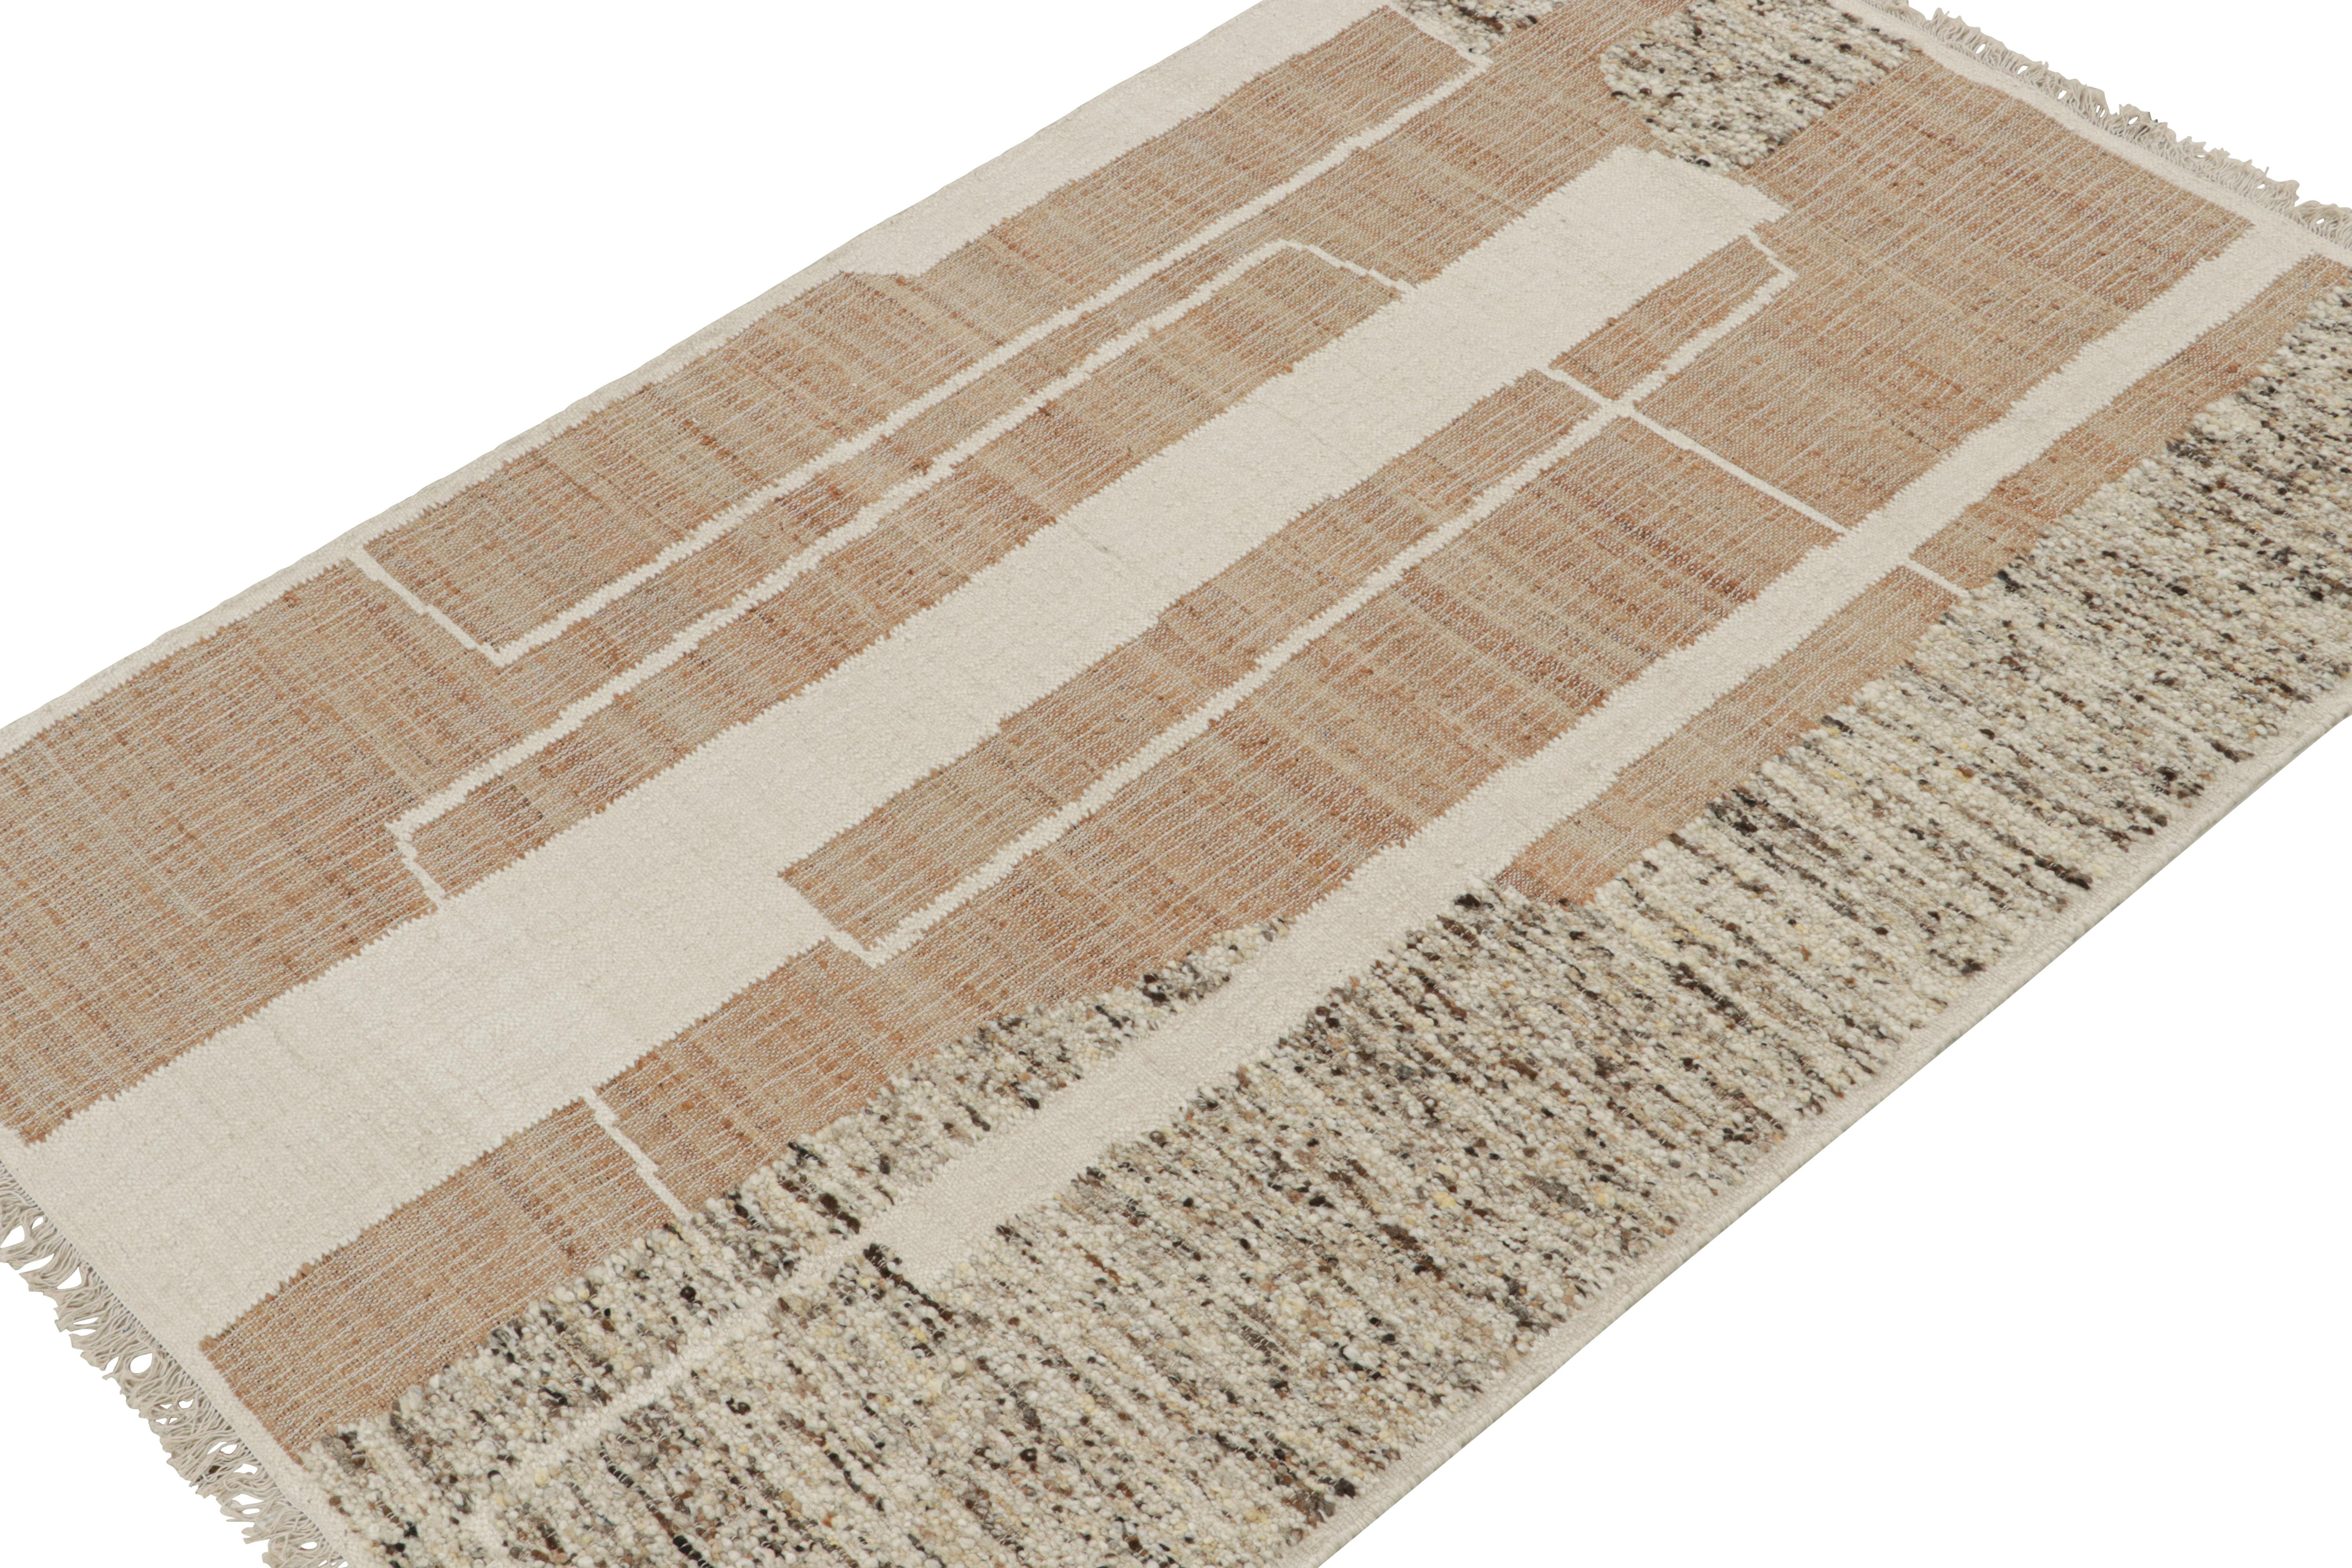 Modern Rug & Kilim’s Contemporary kilim rug in Beige-Brown & White Abstract Pattern For Sale